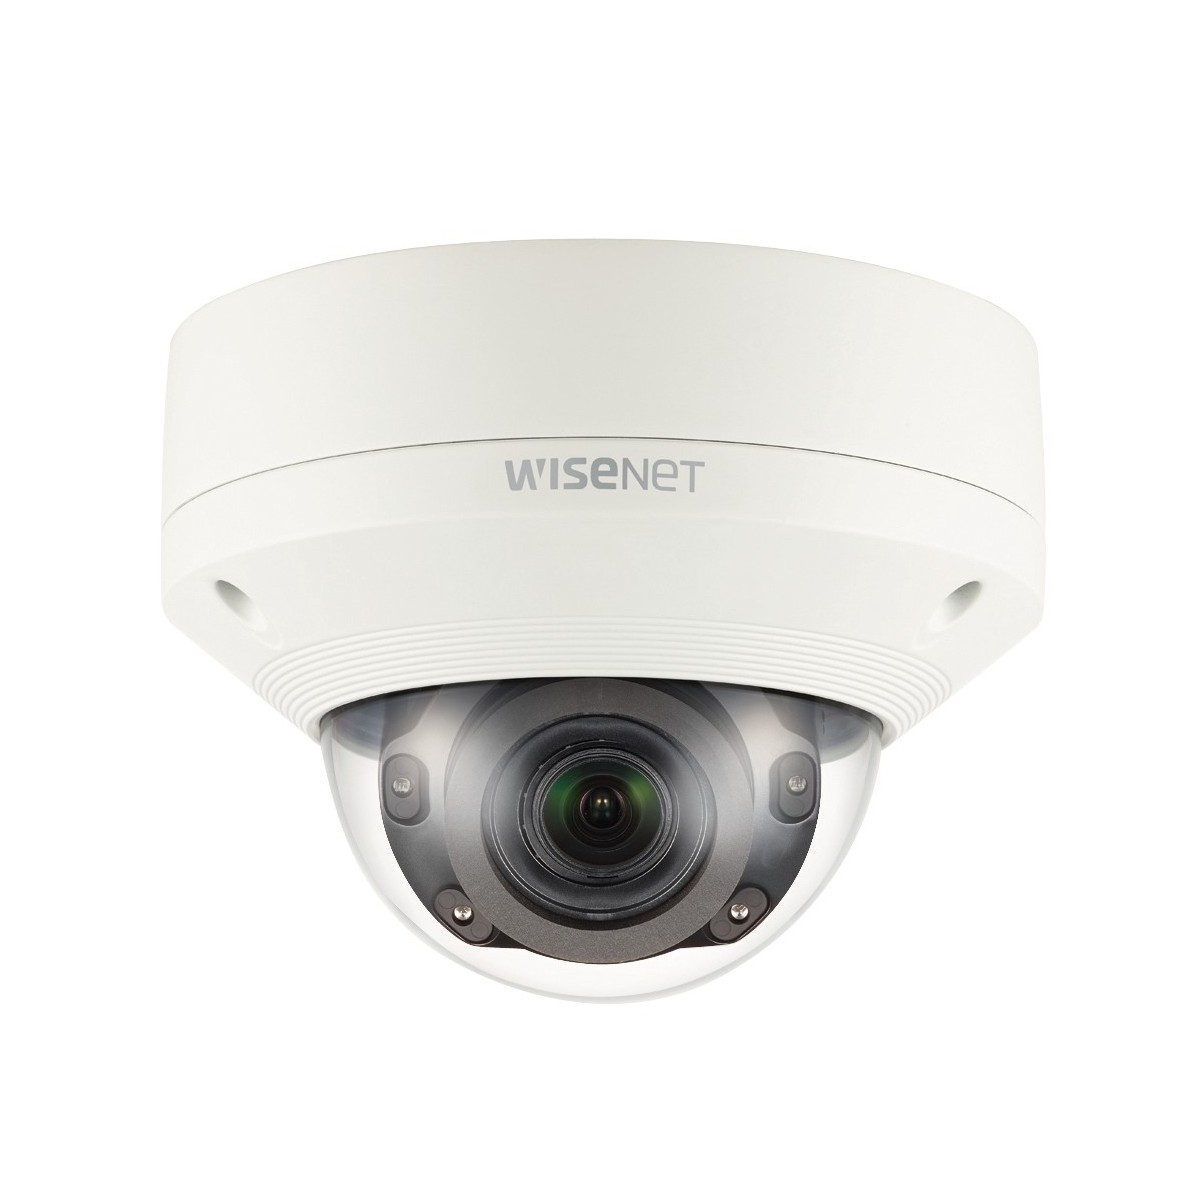 Samsung Hanwha XNV-8080R - IP security camera - Indoor & outdoor - Wired - Digital PTZ - Simplified Chinese - Traditional Chines